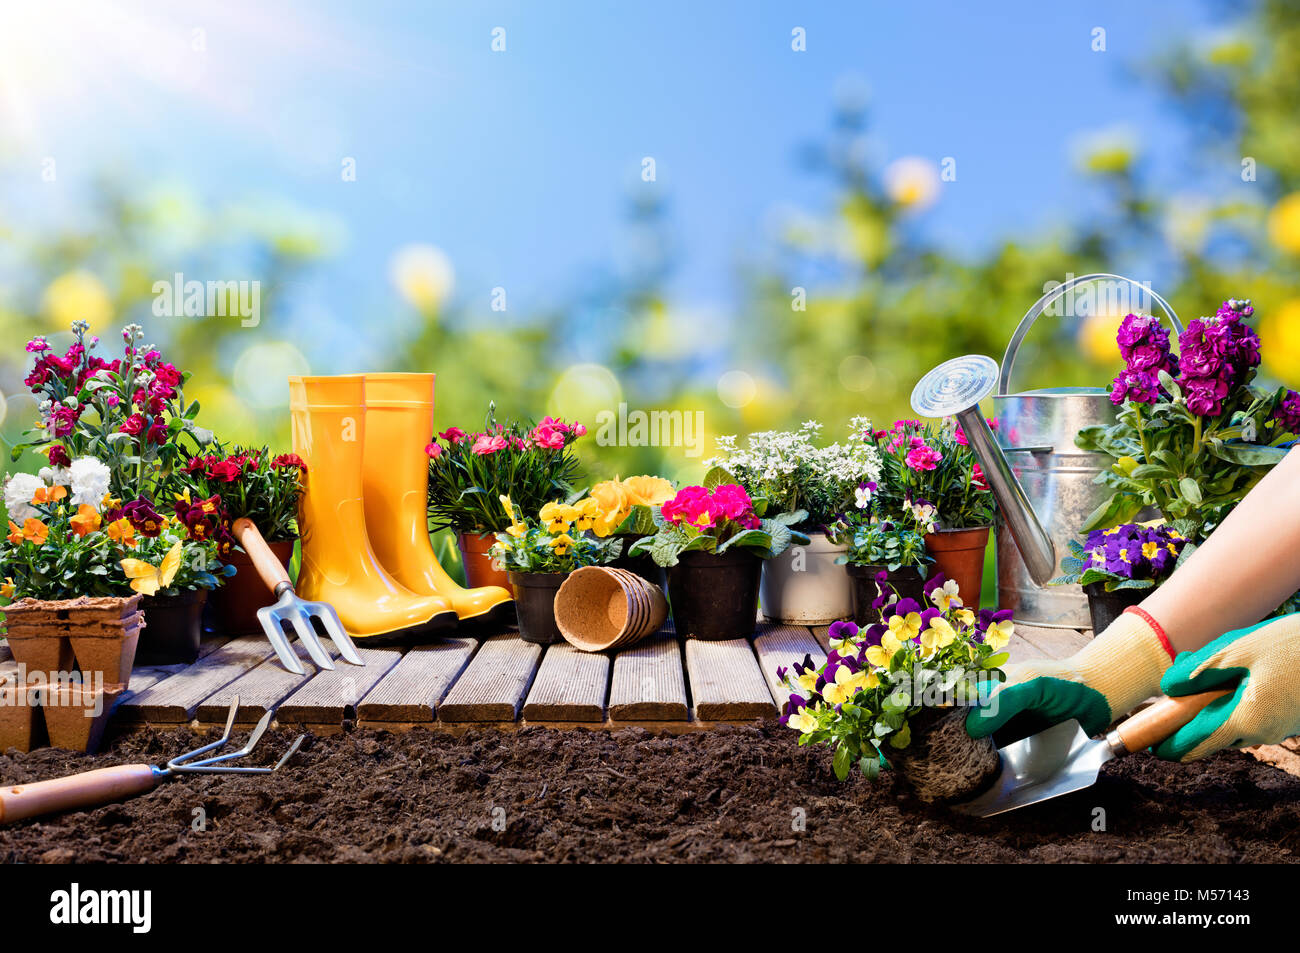 Gardening - Gardener Planting Pansy With Flowerpots And Tools Stock Photo